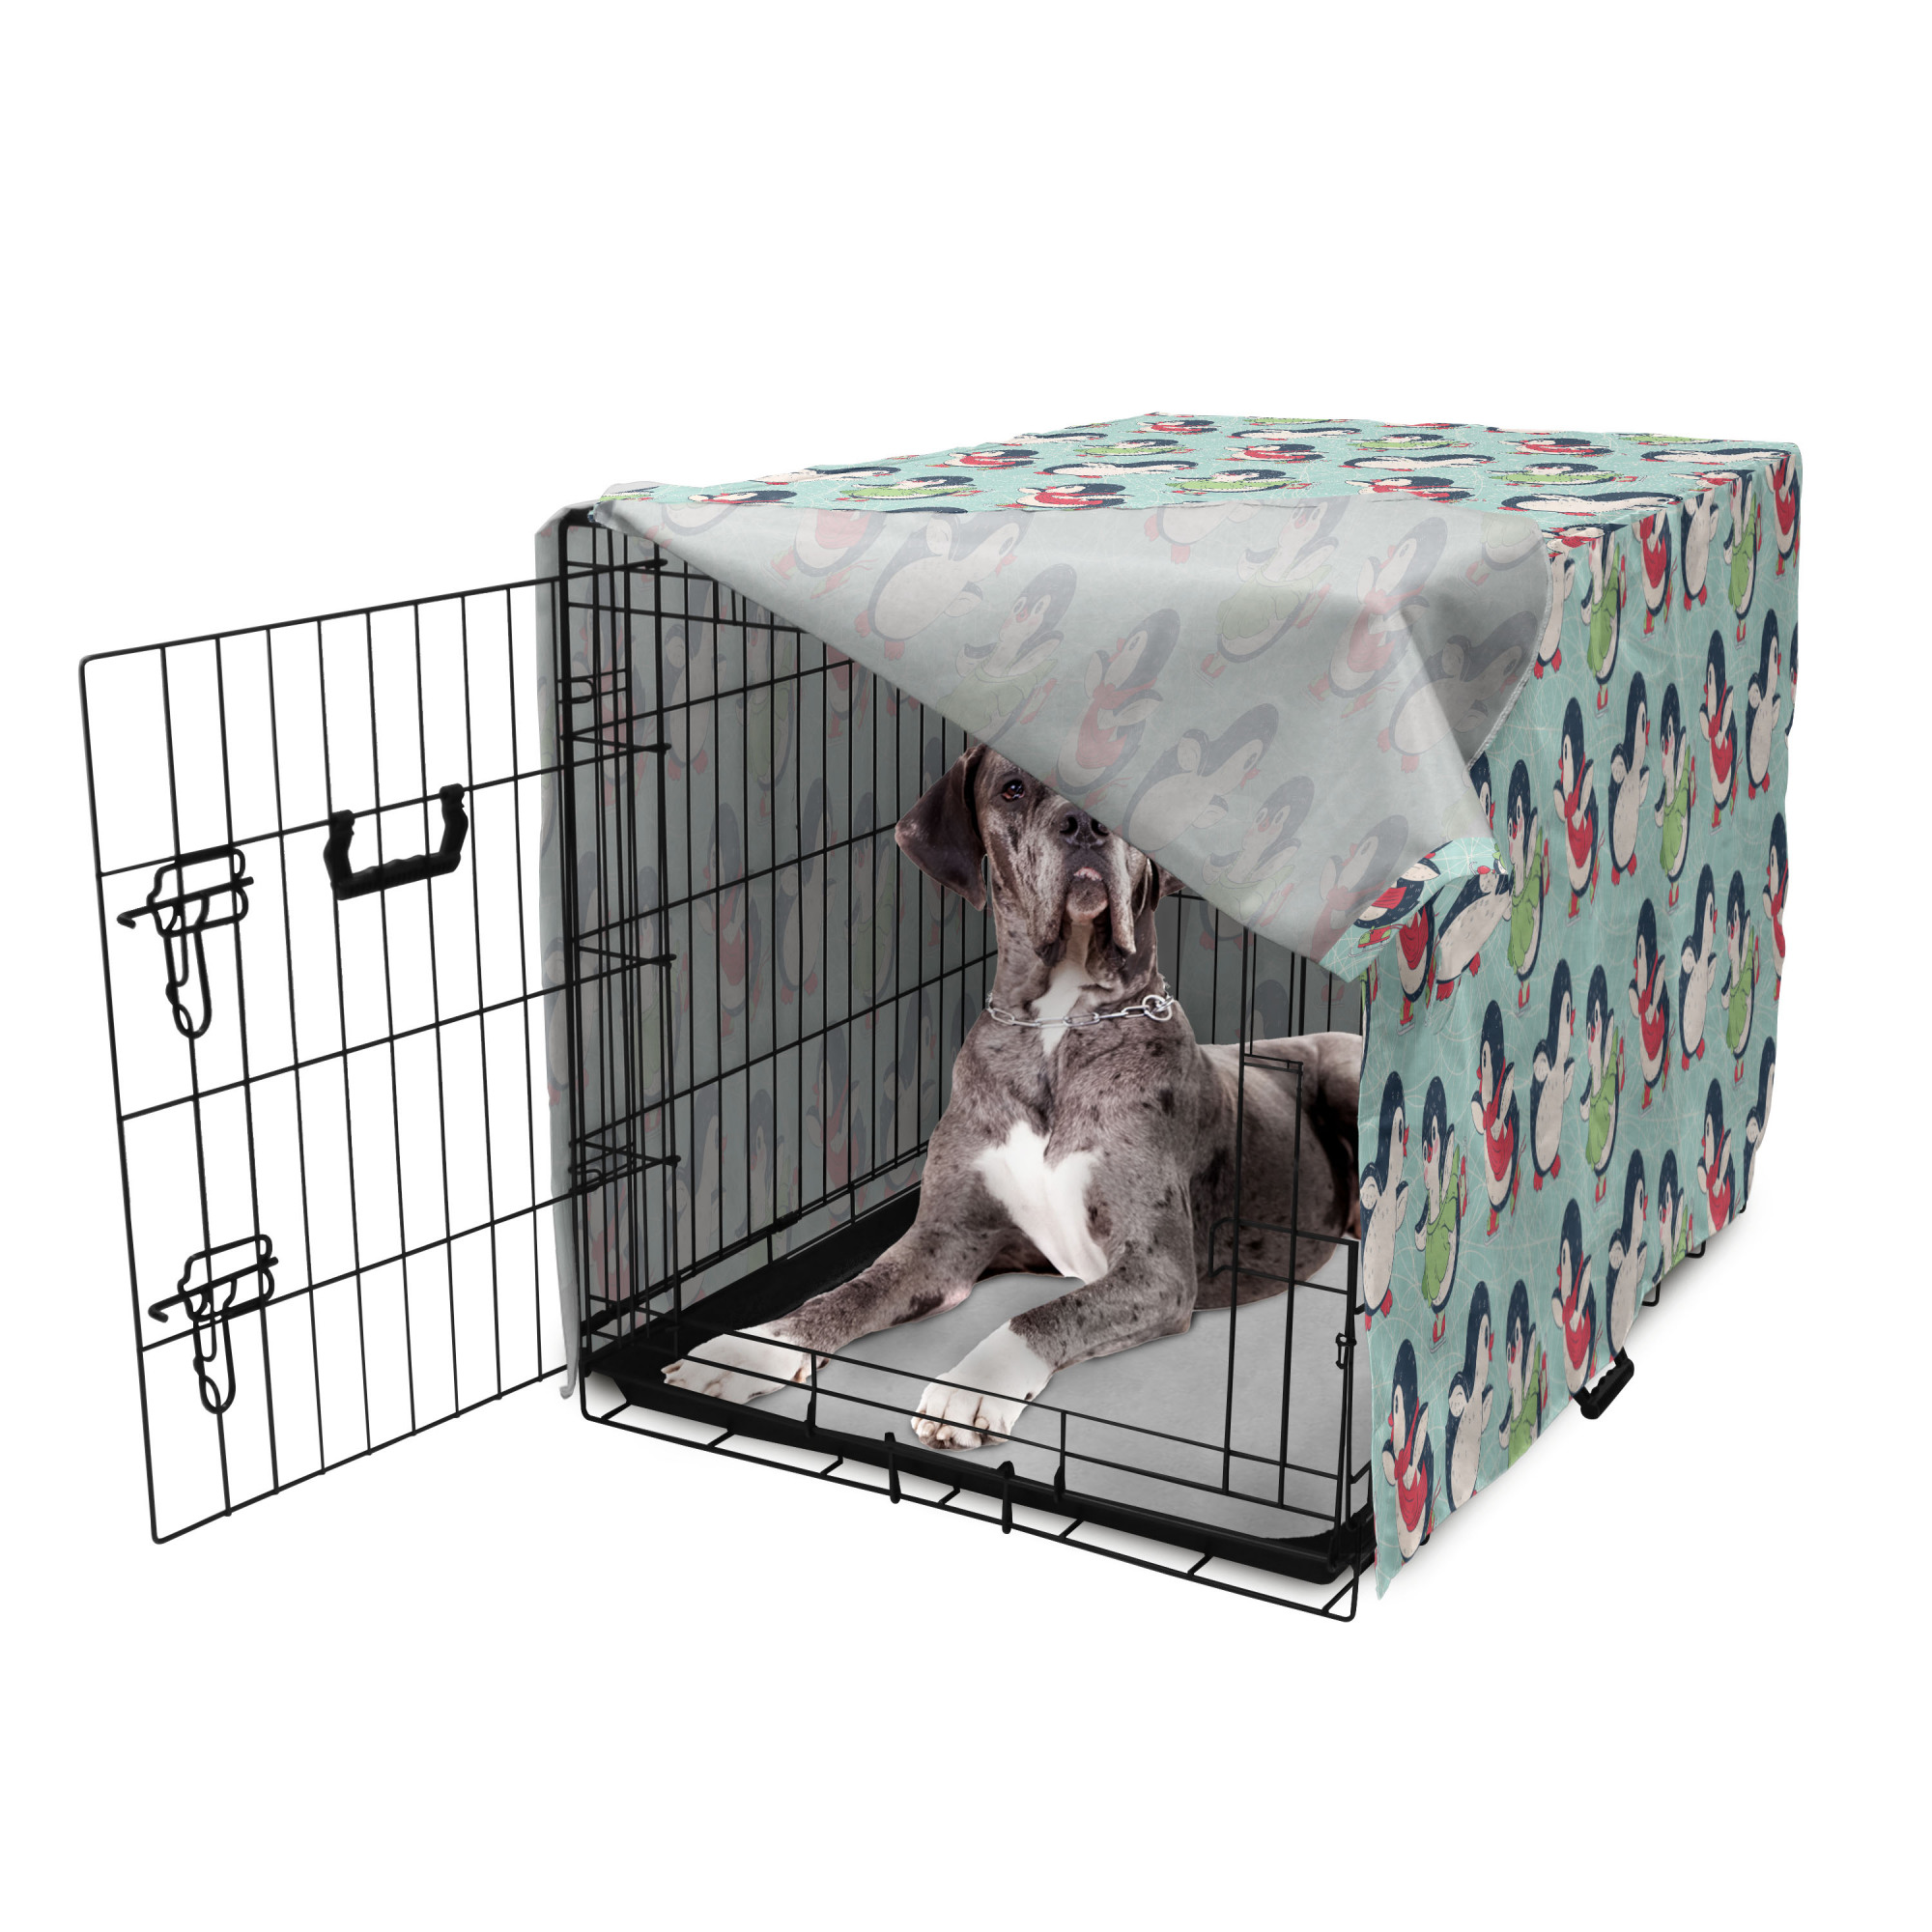 Penguin Dog Crate Cover, Cartoon Arctic Animals Ice Skating with Scarf and Skirts Pattern, Easy to Use Pet Kennel Cover Small Dogs Puppies Kittens, 7 Sizes, Pale Seafoam Multicolor, by Ambesonne - image 5 of 6